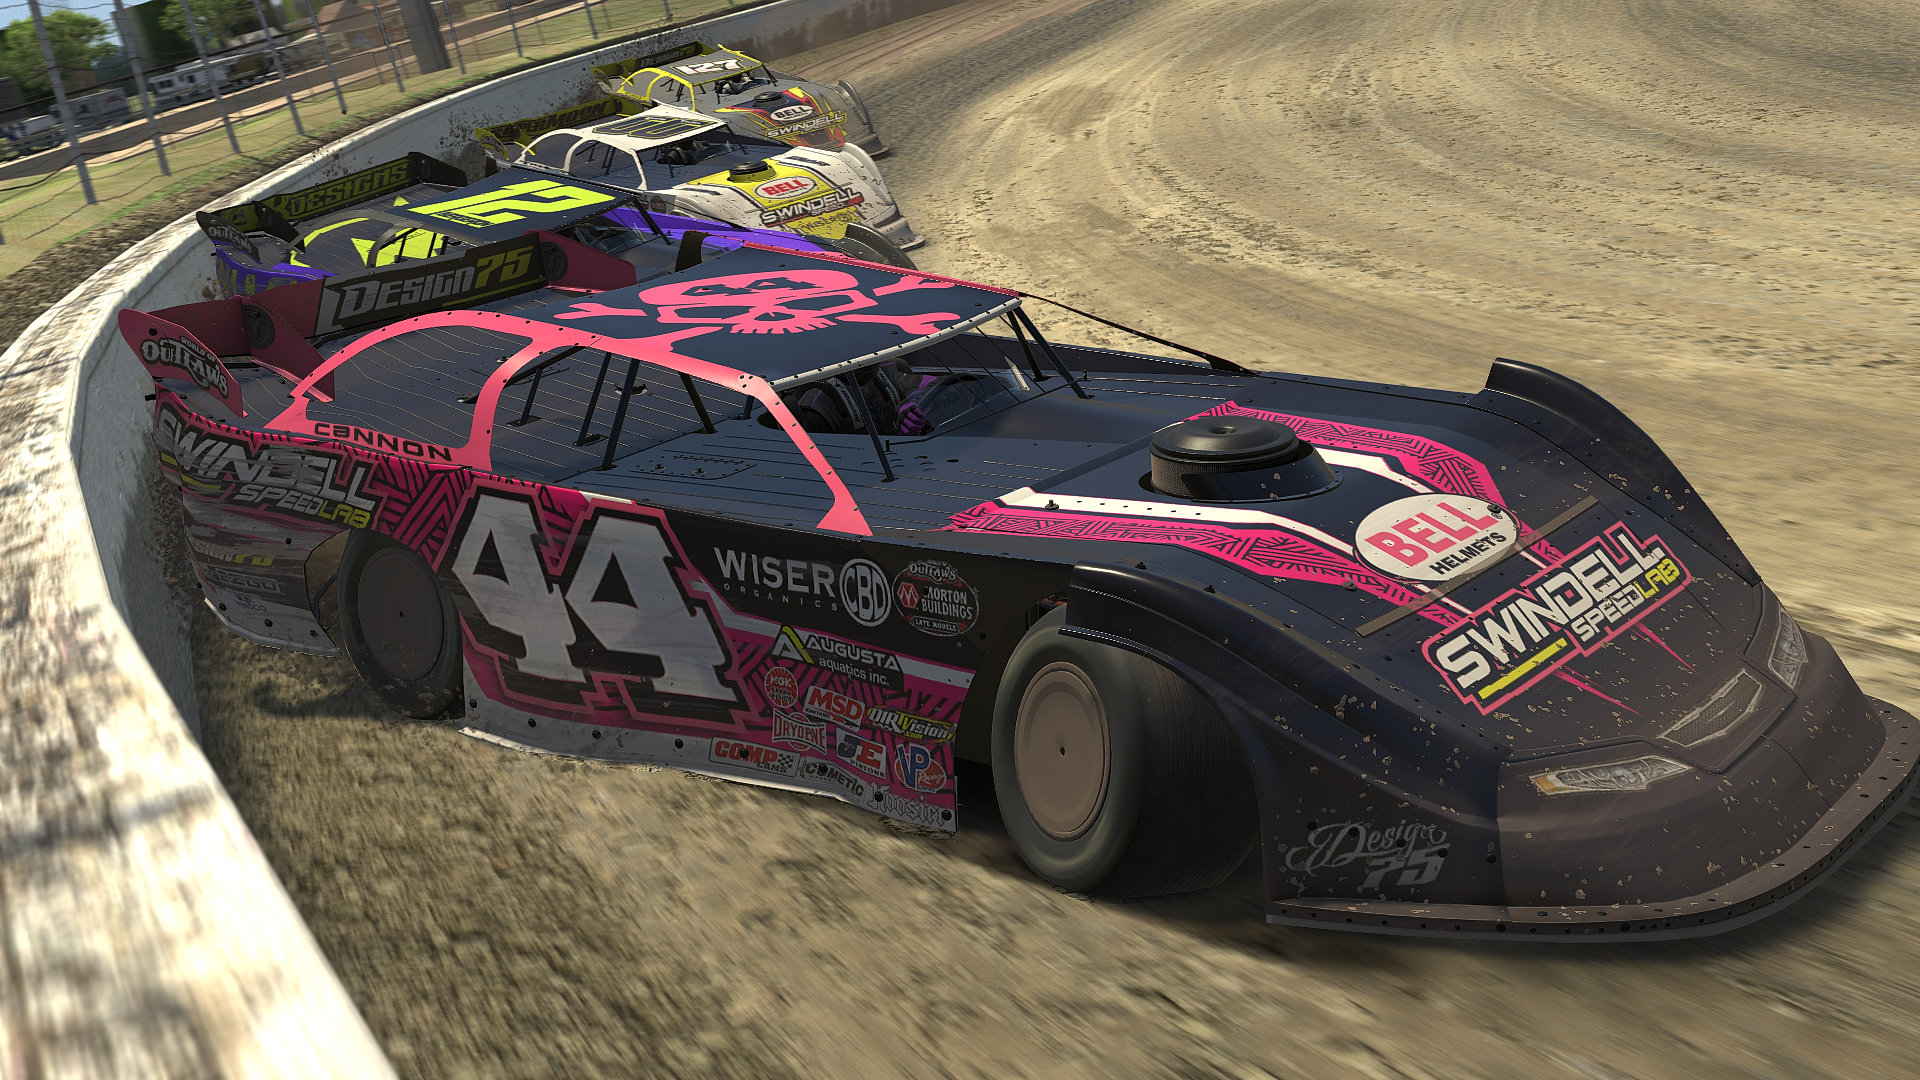 World of Outlaws Late Model Preview: Knoxville.com. iRacing.com Motorsport Simulations